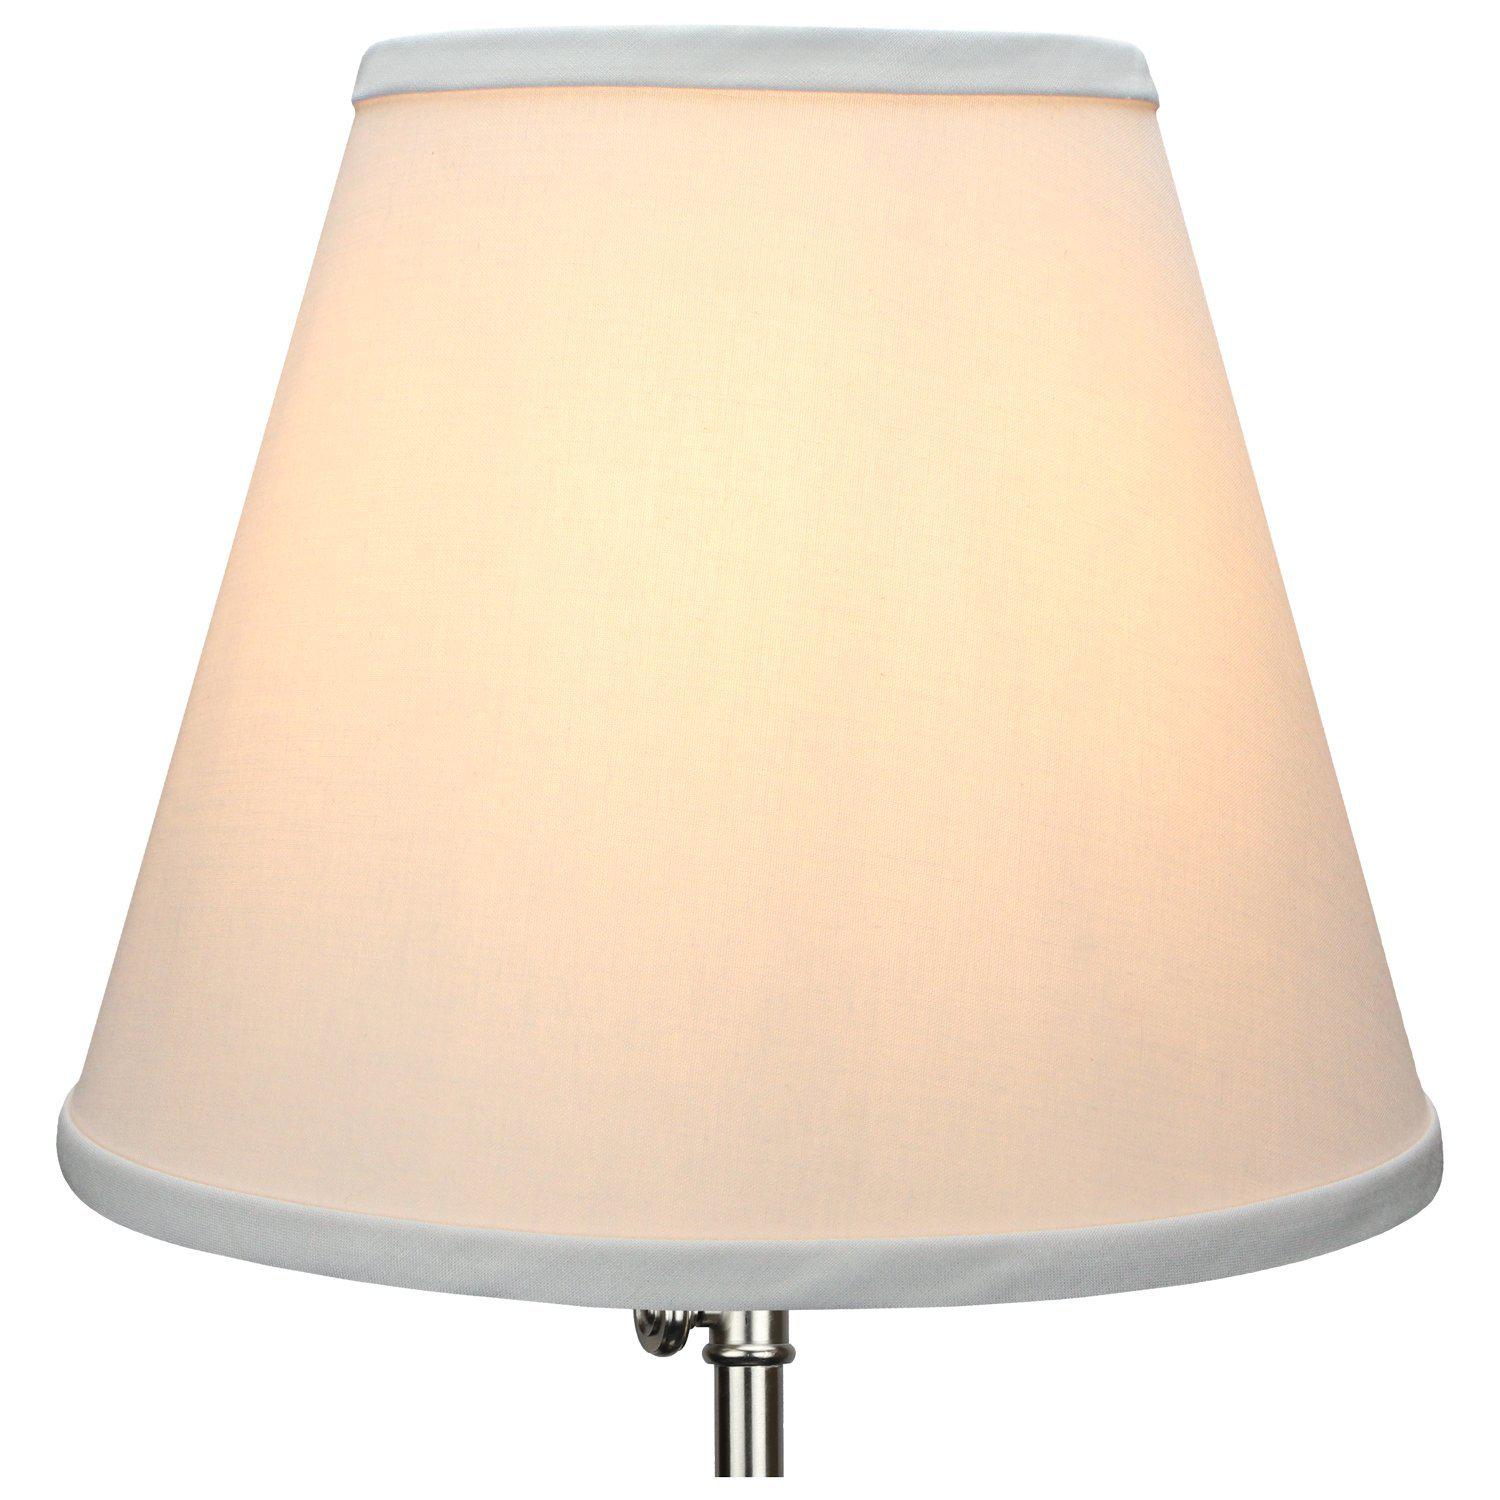 www.FenchelShades.com fenchelshades.com lampshade 6" top diameter x 11" bottom diameter x 9" slant height with washer (spider) attachment for lamps